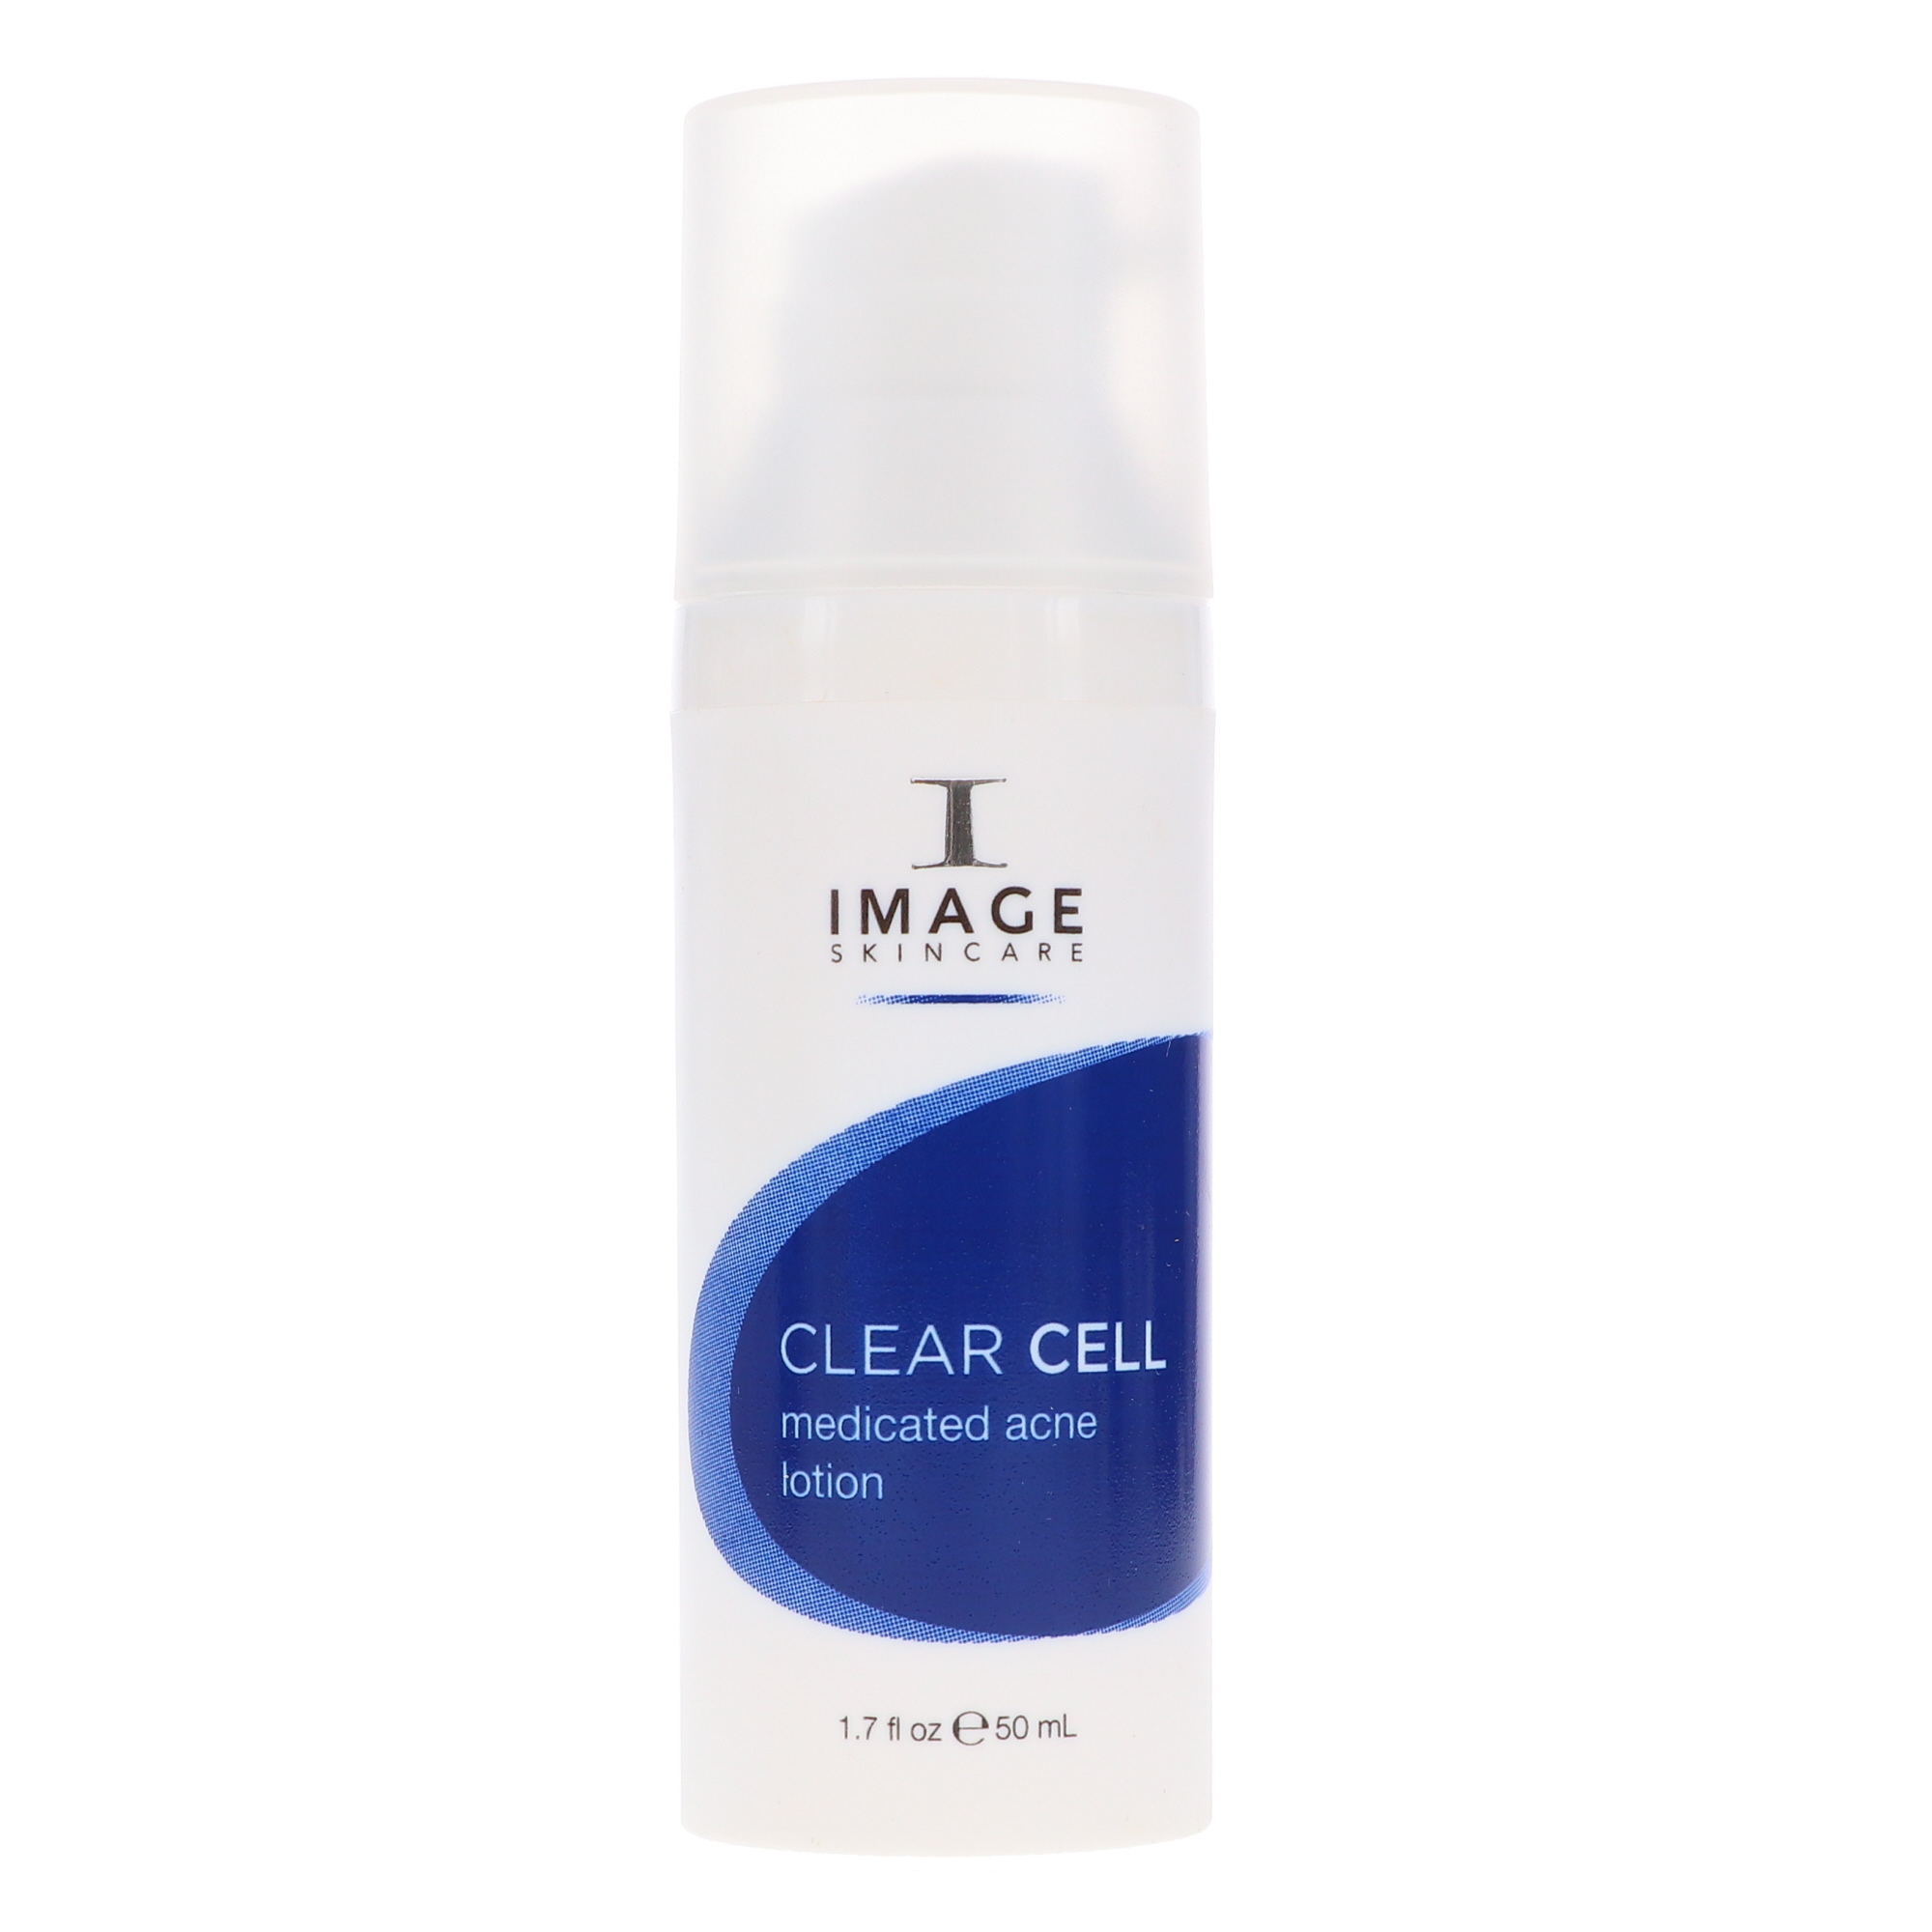 Image Clear Cell Acne Lotion, 1.7 Oz - image 1 of 8